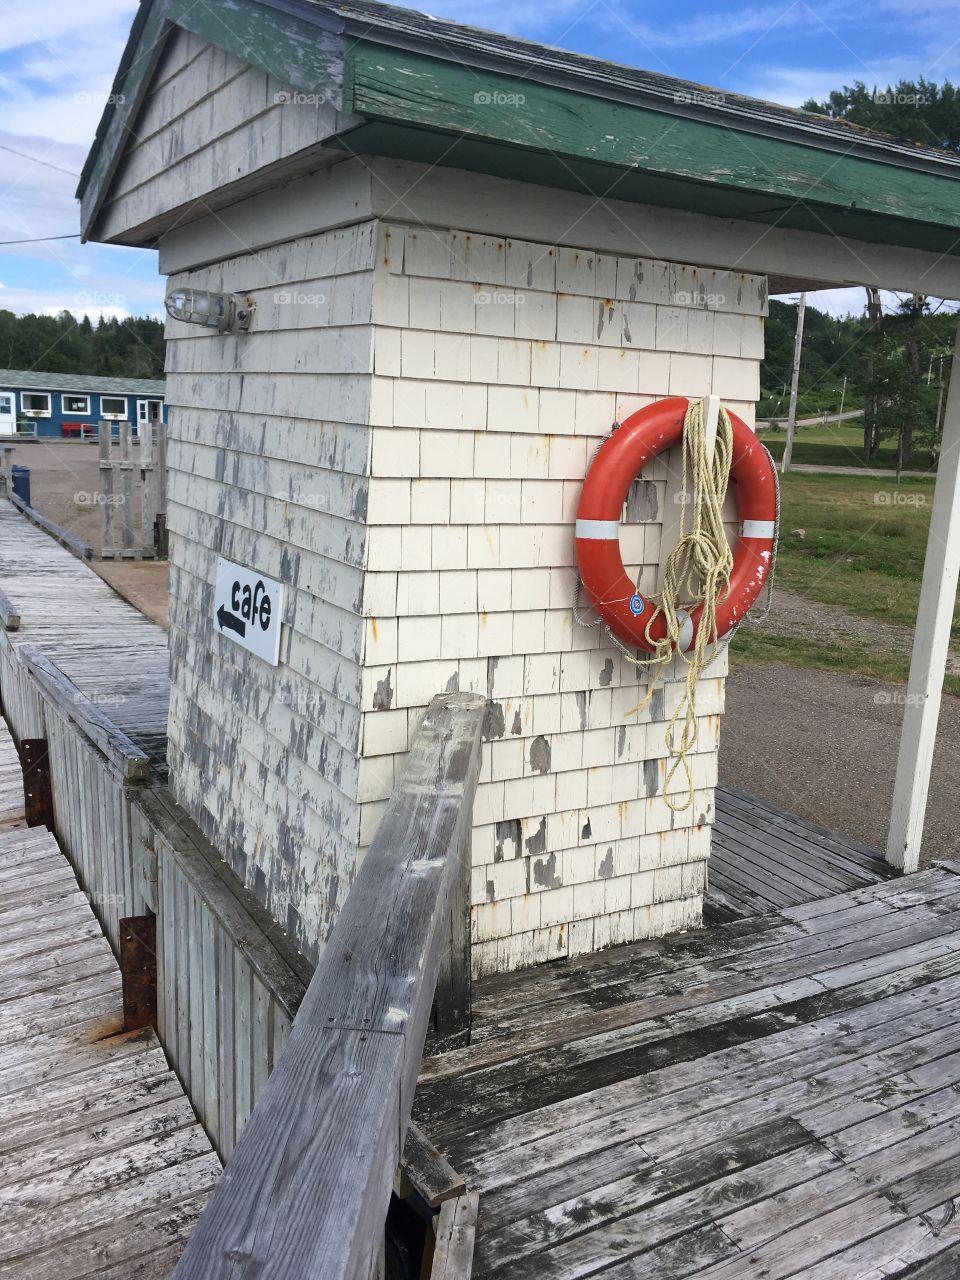 Weathered Seaside building on wharf. Painted sign pointing to cafe. Life saving buoy and rope hanging. Marine, nautical scene. 